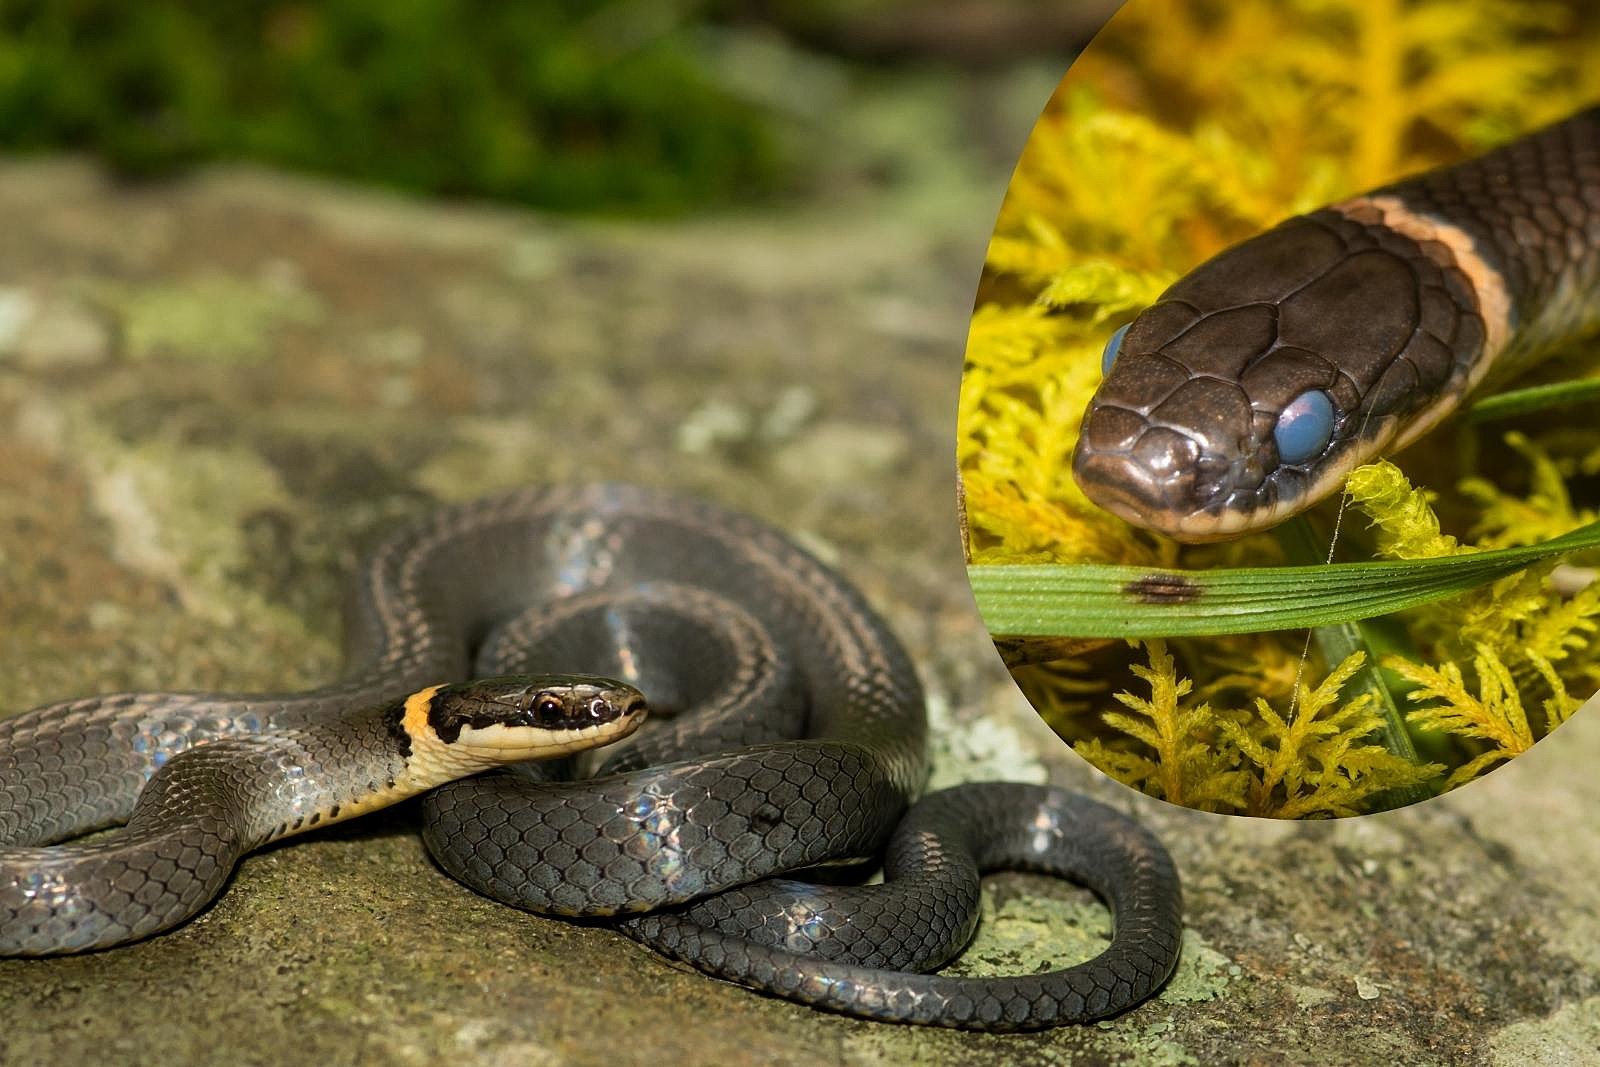 A ringnecked snake coiled on a rock; an inset shows their head close up near a shed.